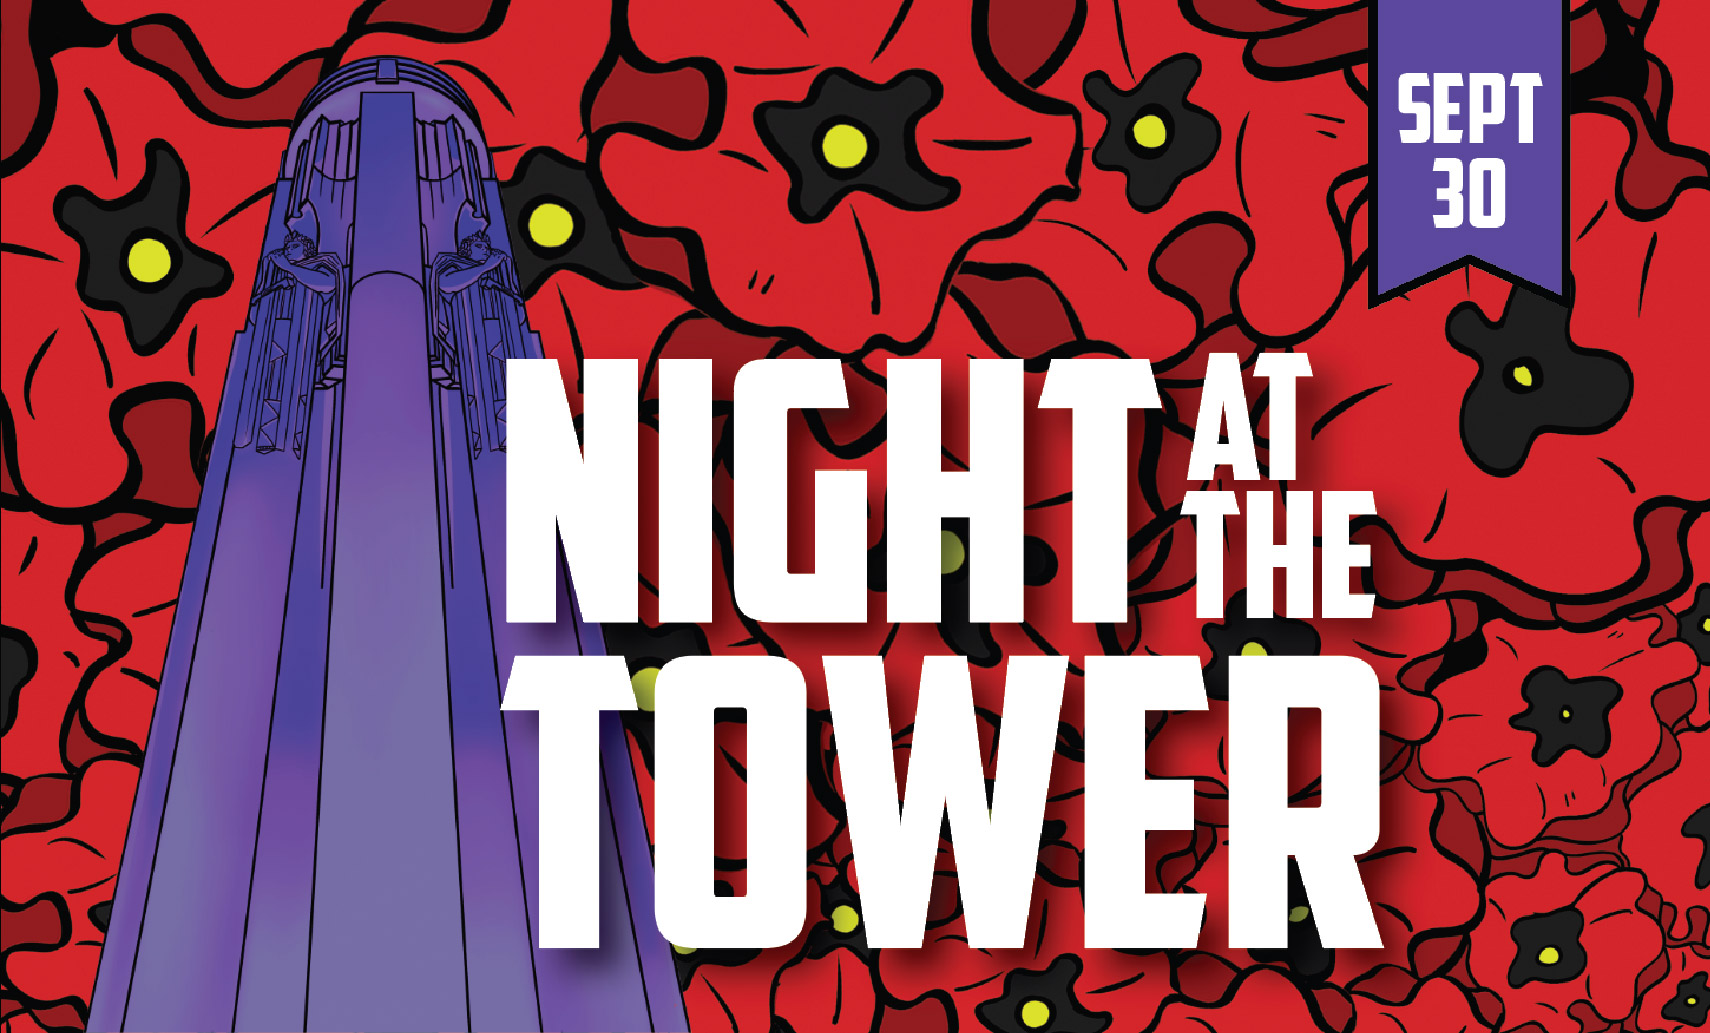 Image: Stylized purple graphic of the Liberty Memorial Tower over a background of red poppies. Text: 'Night at the Tower / Sept. 30'